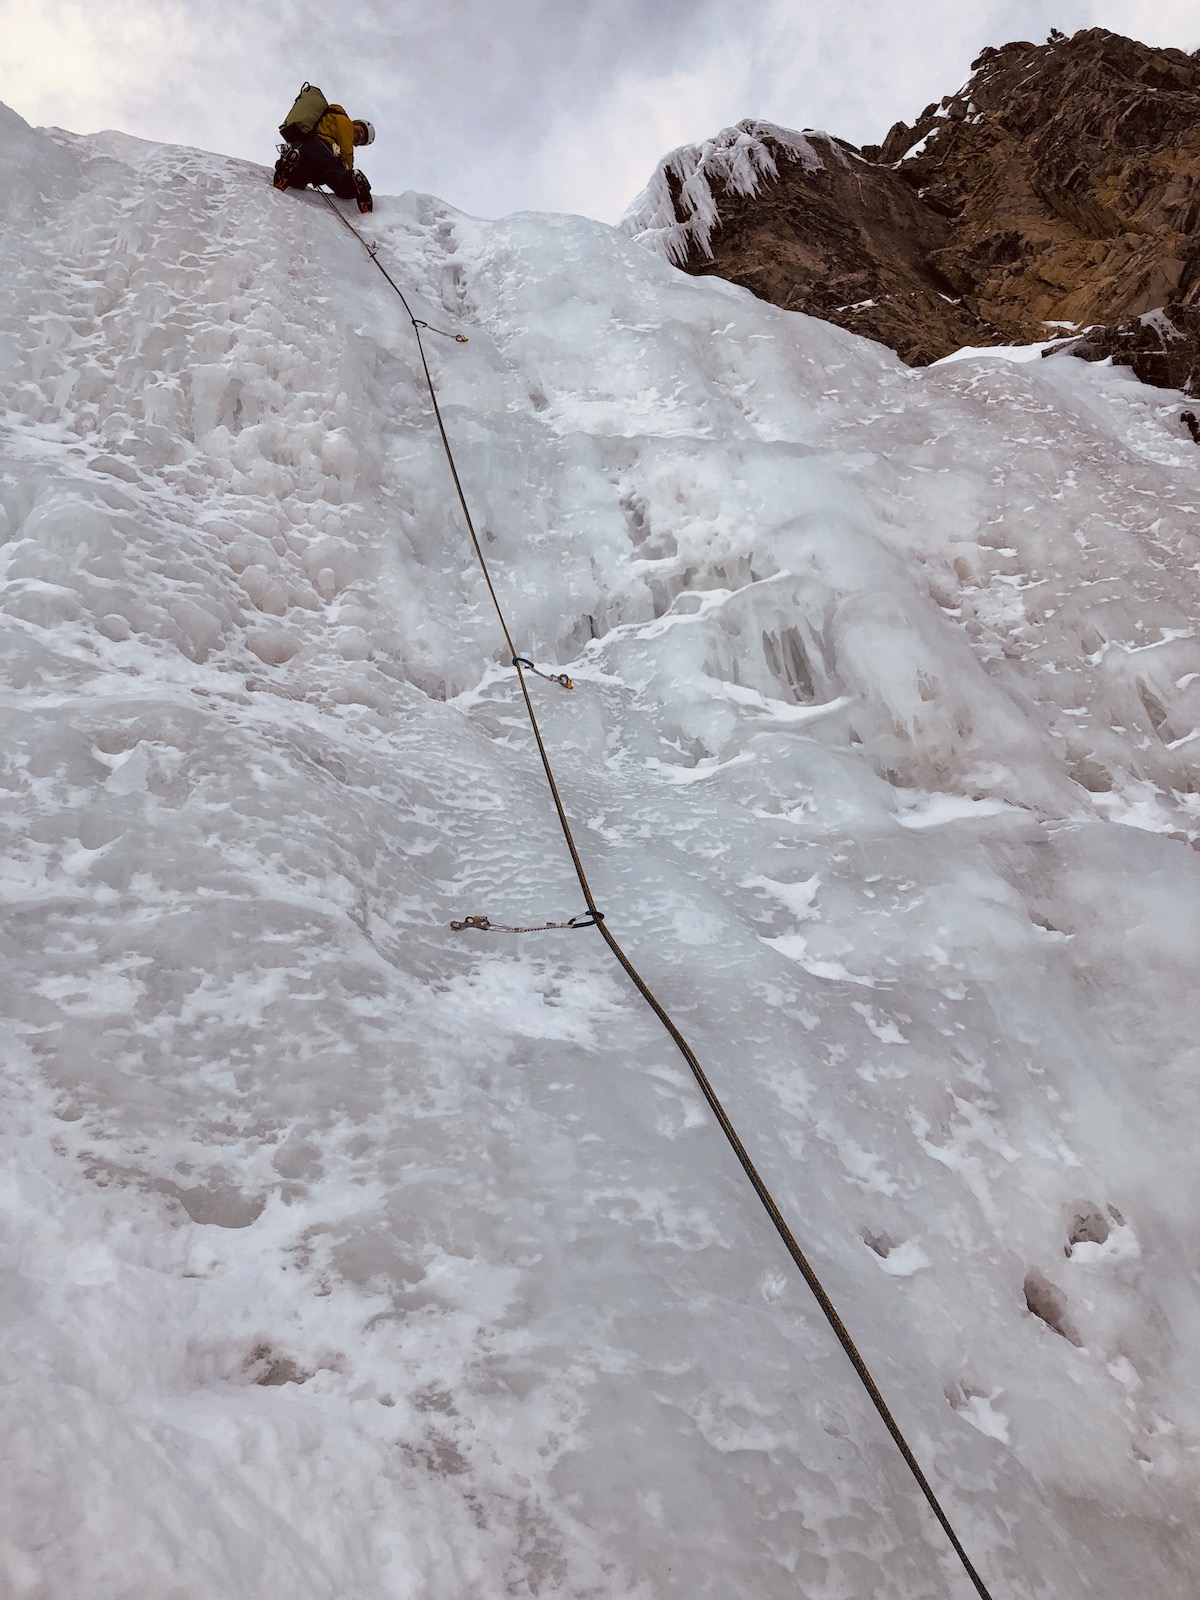 Cold, wet conditions with dry snow on the belay ledges made for tricky conditions—but Bruno Schull makes it look easy above Sertig, Switzerland. [Photo] Rob Coppolillo